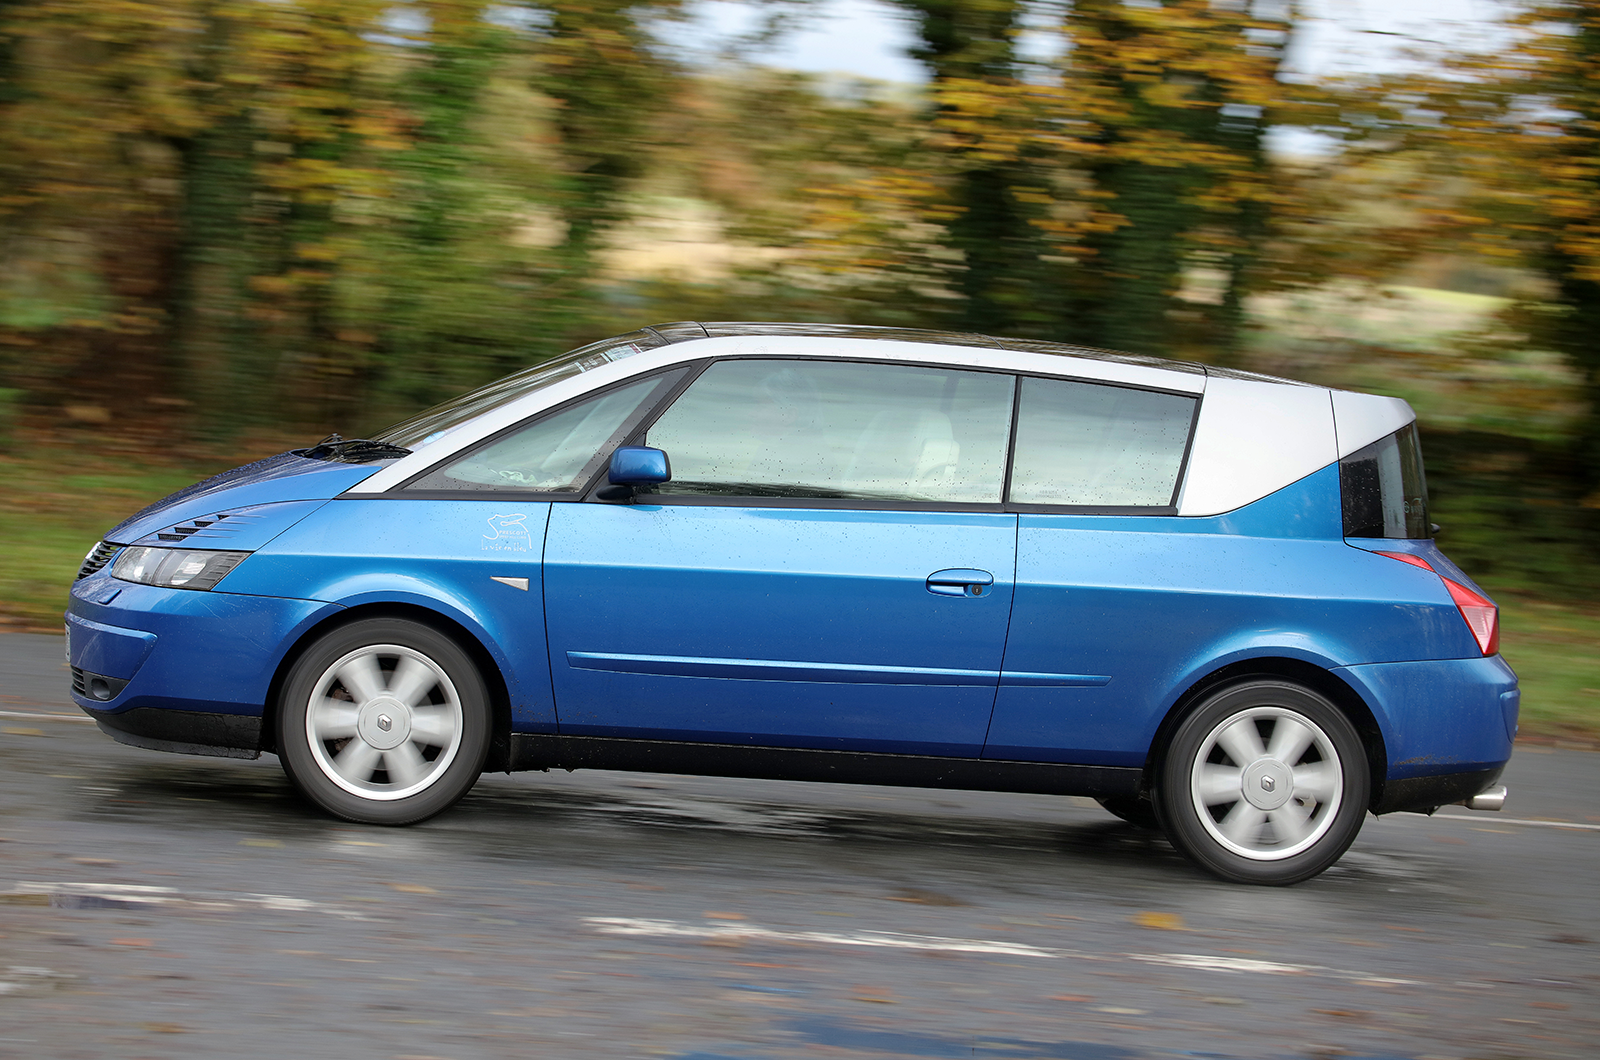 Classic & Sports Car – Buyer’s guide: Renault Avantime